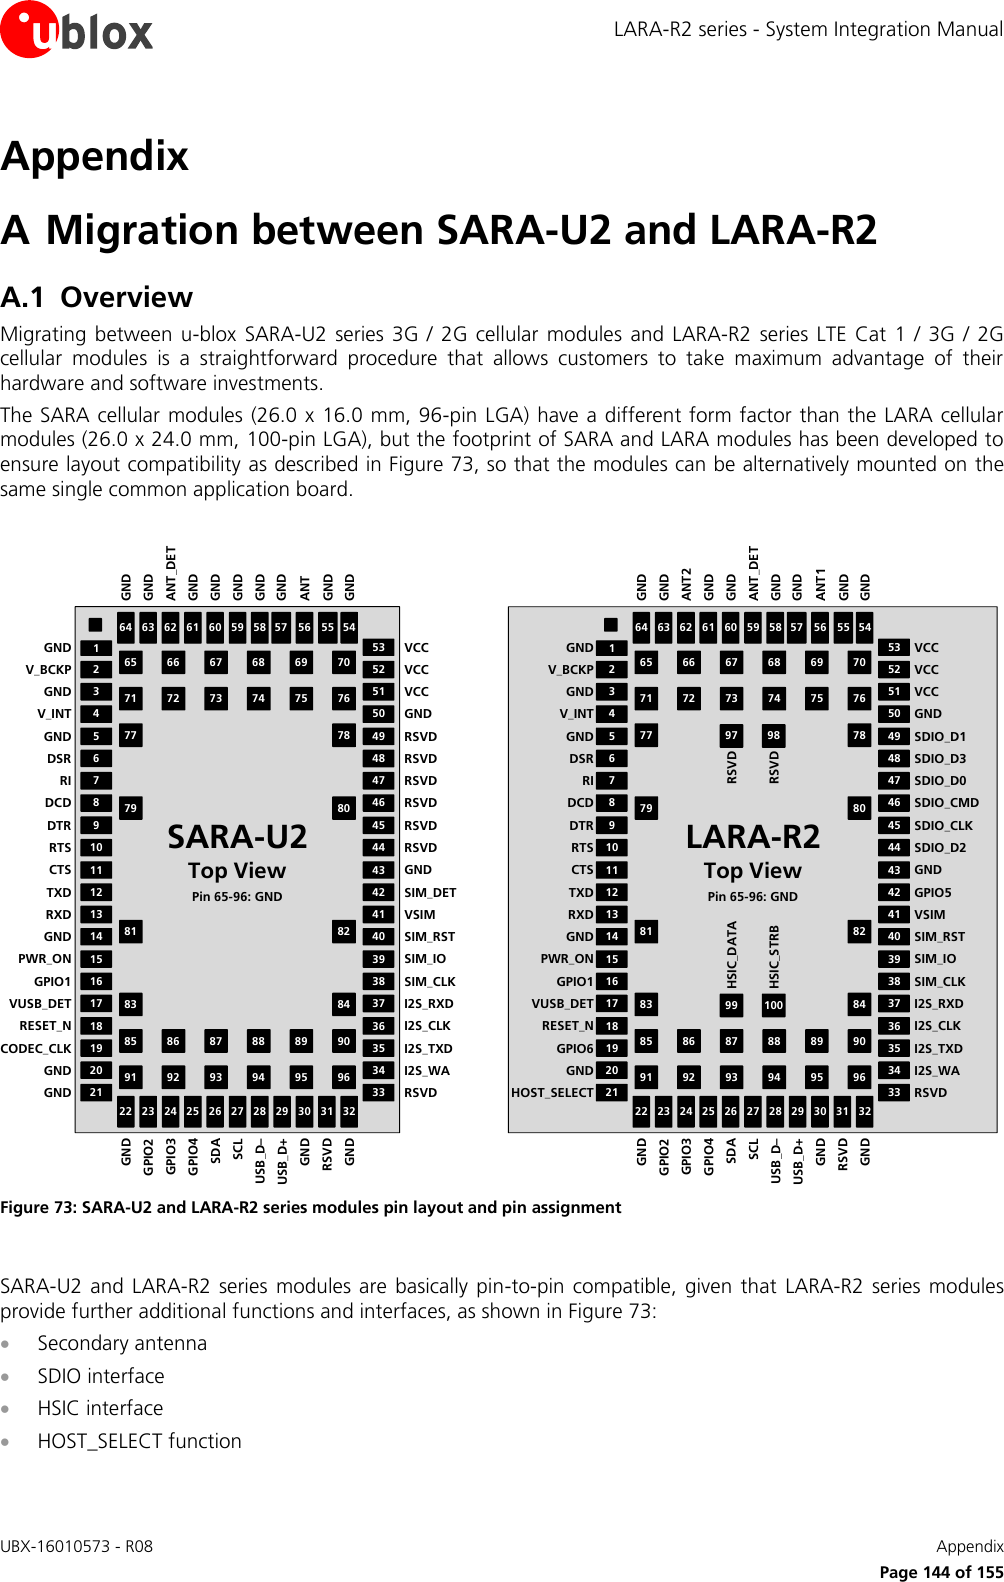 LARA-R2 series - System Integration Manual UBX-16010573 - R08    Appendix      Page 144 of 155 Appendix A Migration between SARA-U2 and LARA-R2 A.1 Overview Migrating  between  u-blox  SARA-U2  series 3G  /  2G  cellular  modules  and LARA-R2  series LTE  Cat  1  /  3G  /  2G cellular  modules  is  a  straightforward  procedure  that  allows  customers  to  take  maximum  advantage  of  their hardware and software investments. The SARA cellular modules (26.0 x  16.0 mm, 96-pin LGA) have a different form factor than the LARA cellular modules (26.0 x 24.0 mm, 100-pin LGA), but the footprint of SARA and LARA modules has been developed to ensure layout compatibility as described in Figure 73, so that the modules can be alternatively mounted on the same single common application board.  64 63 61 60 58 57 55 54225065 66 67 68 69 7071 72 73 74 75 7677 7879 8081 8283 8485 86 87 88 89 9091 92 93 94 95 96CTSRTSDCDRIV_INTV_BCKPGNDCODEC_CLKRESET_NGPIO1PWR_ONRXDTXD11108754212119181615131232017149623 25 26 28 29 31 3224 27 3043444647495253333536383941425148454037345962 56GNDGNDDSRDTRGNDVUSB_DETGNDUSB_D–USB_D+RSVDGNDGPIO2GPIO3SDASCLGPIO4GNDGNDGNDGNDVCCVCCRSVDI2S_TXDI2S_CLKSIM_CLKSIM_IOVSIMSIM_DETVCCSIM_RSTI2S_RXDI2S_WAGNDGNDGNDGNDGNDGNDGNDGNDGNDANT_DETANTSARA-U2Top ViewPin 65-96: GNDGNDRSVDRSVDRSVDRSVDRSVD RSVD64 63 61 60 58 57 55 54225065 66 67 68 69 7071 72 73 74 75 7677 7879 8081 8283 8485 86 87 88 89 9091 92 93 94 95 96CTSRTSDCDRIV_INTV_BCKPGNDGPIO6RESET_NGPIO1PWR_ONRXDTXD11108754212119181615131232017149623 25 26 28 29 31 3224 27 3043444647495253333536383941425148454037345962 56GNDGNDDSRDTRGNDVUSB_DETGNDUSB_D–USB_D+RSVDGNDGPIO2GPIO3SDASCLGPIO4GNDGNDGNDGNDVCCVCCRSVDI2S_TXDI2S_CLKSIM_CLKSIM_IOVSIMGPIO5VCCSIM_RSTI2S_RXDI2S_WAGNDGNDGNDGNDGNDGNDGNDGNDANT_DETANT2ANT1LARA-R2Top ViewPin 65-96: GND99 10097 98RSVDRSVDHSIC_STRBHSIC_DATAHOST_SELECTSDIO_D2SDIO_CMDSDIO_D0SDIO_D1SDIO_D3SDIO_CLK Figure 73: SARA-U2 and LARA-R2 series modules pin layout and pin assignment  SARA-U2  and  LARA-R2  series  modules are  basically  pin-to-pin compatible,  given  that  LARA-R2  series  modules provide further additional functions and interfaces, as shown in Figure 73:  Secondary antenna  SDIO interface  HSIC interface  HOST_SELECT function  